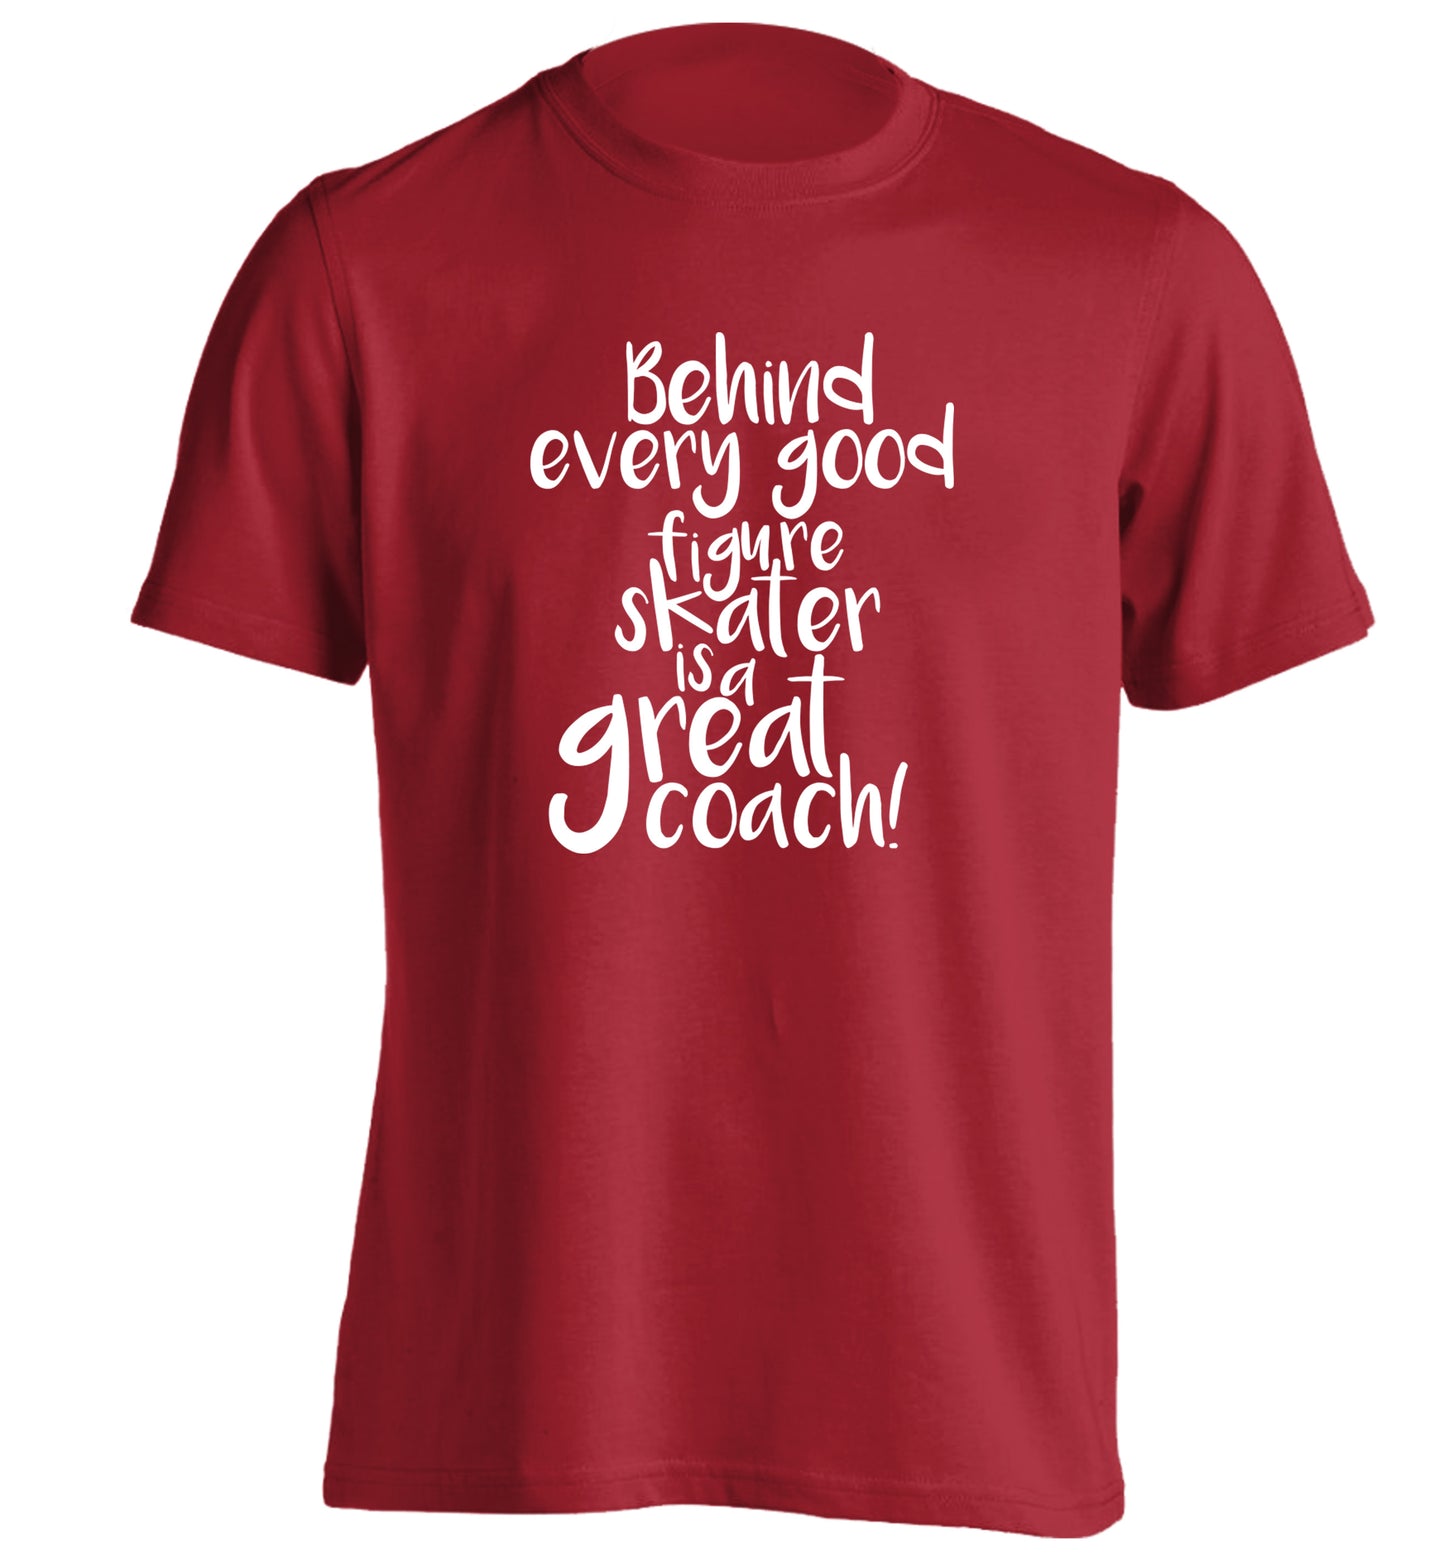 Behind every good figure skater is a great coach adults unisexred Tshirt 2XL